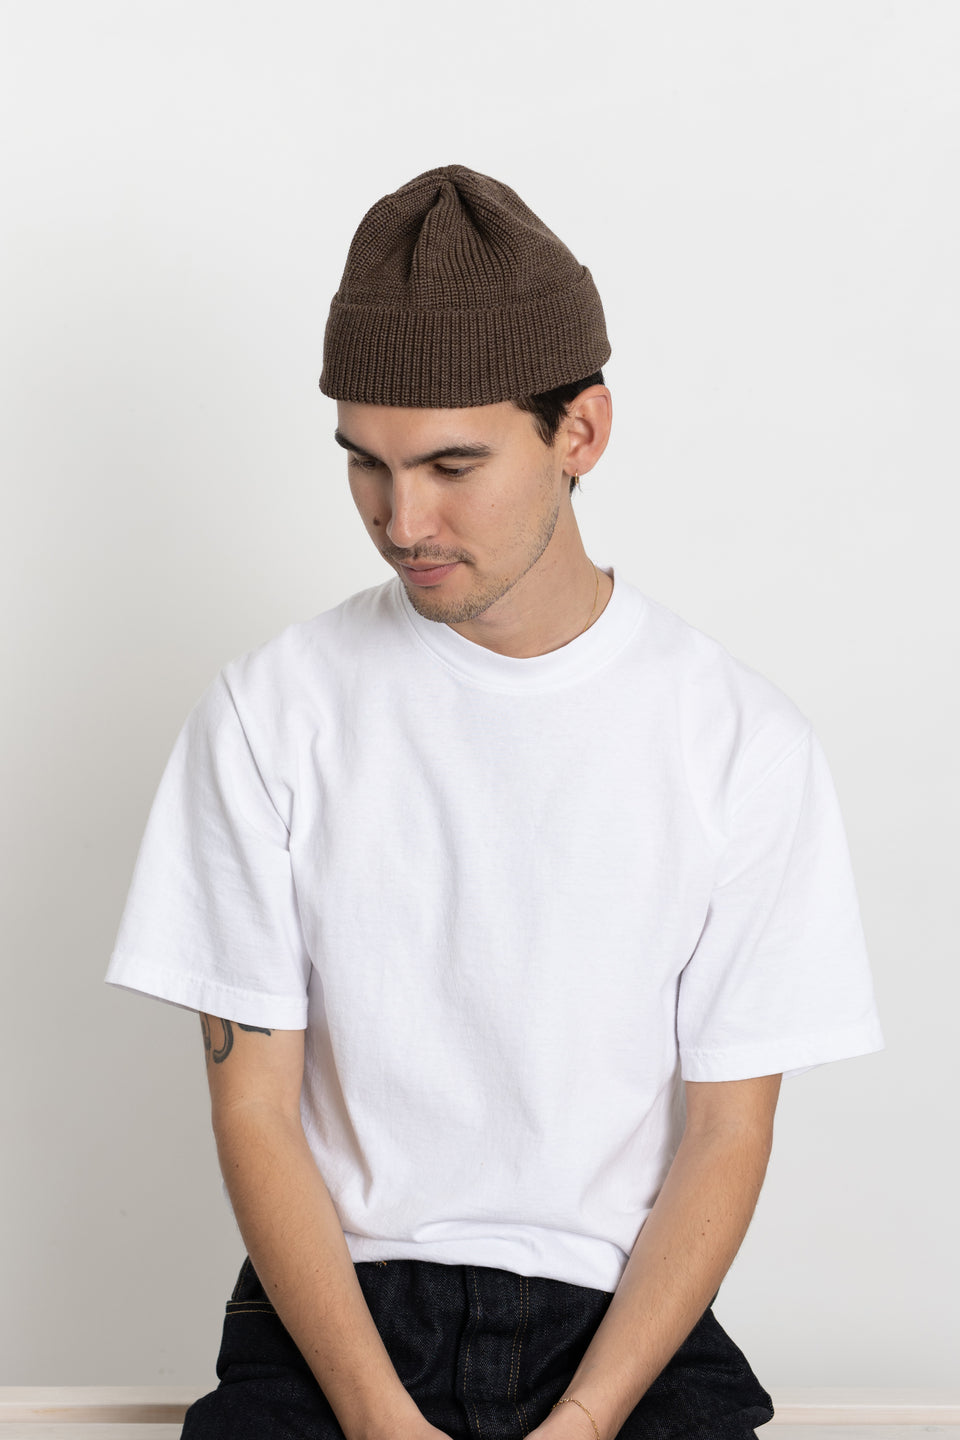 Found Feather Made in Japan Men's Collection FW23 Knit Watch Cap Italian Merino Wool Brown Calculus Victoria BC Canada